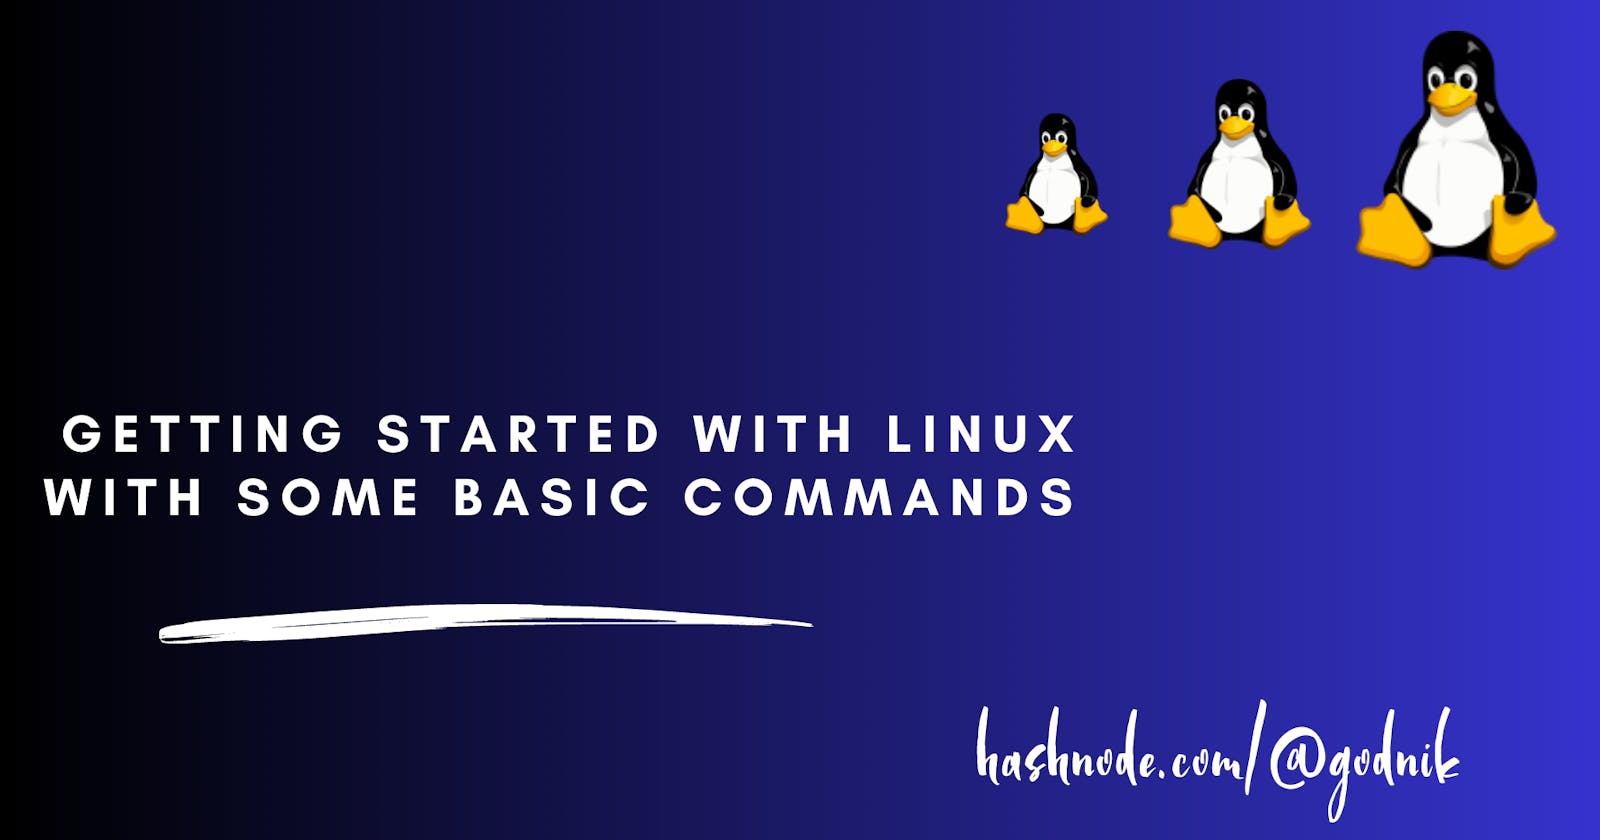 Getting Started with Linux with some basic commands